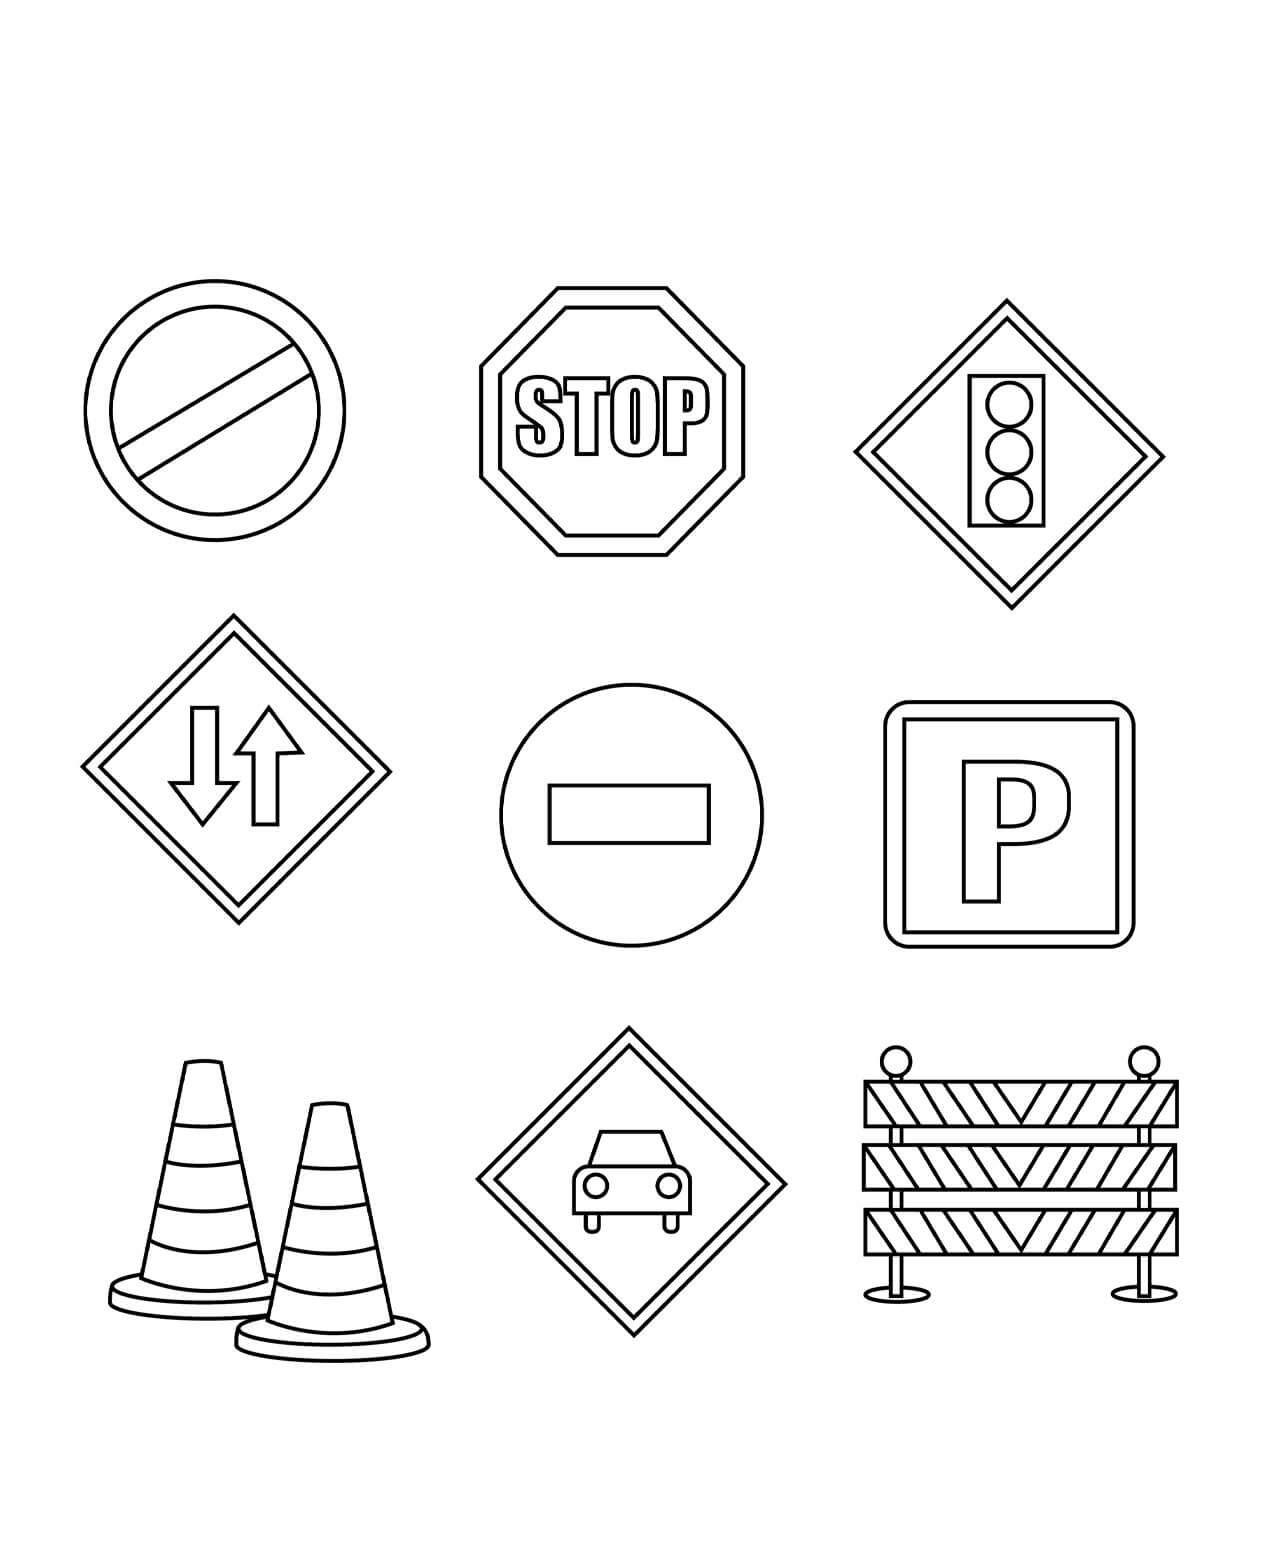 Nine Street Signs in Road and Street Safety